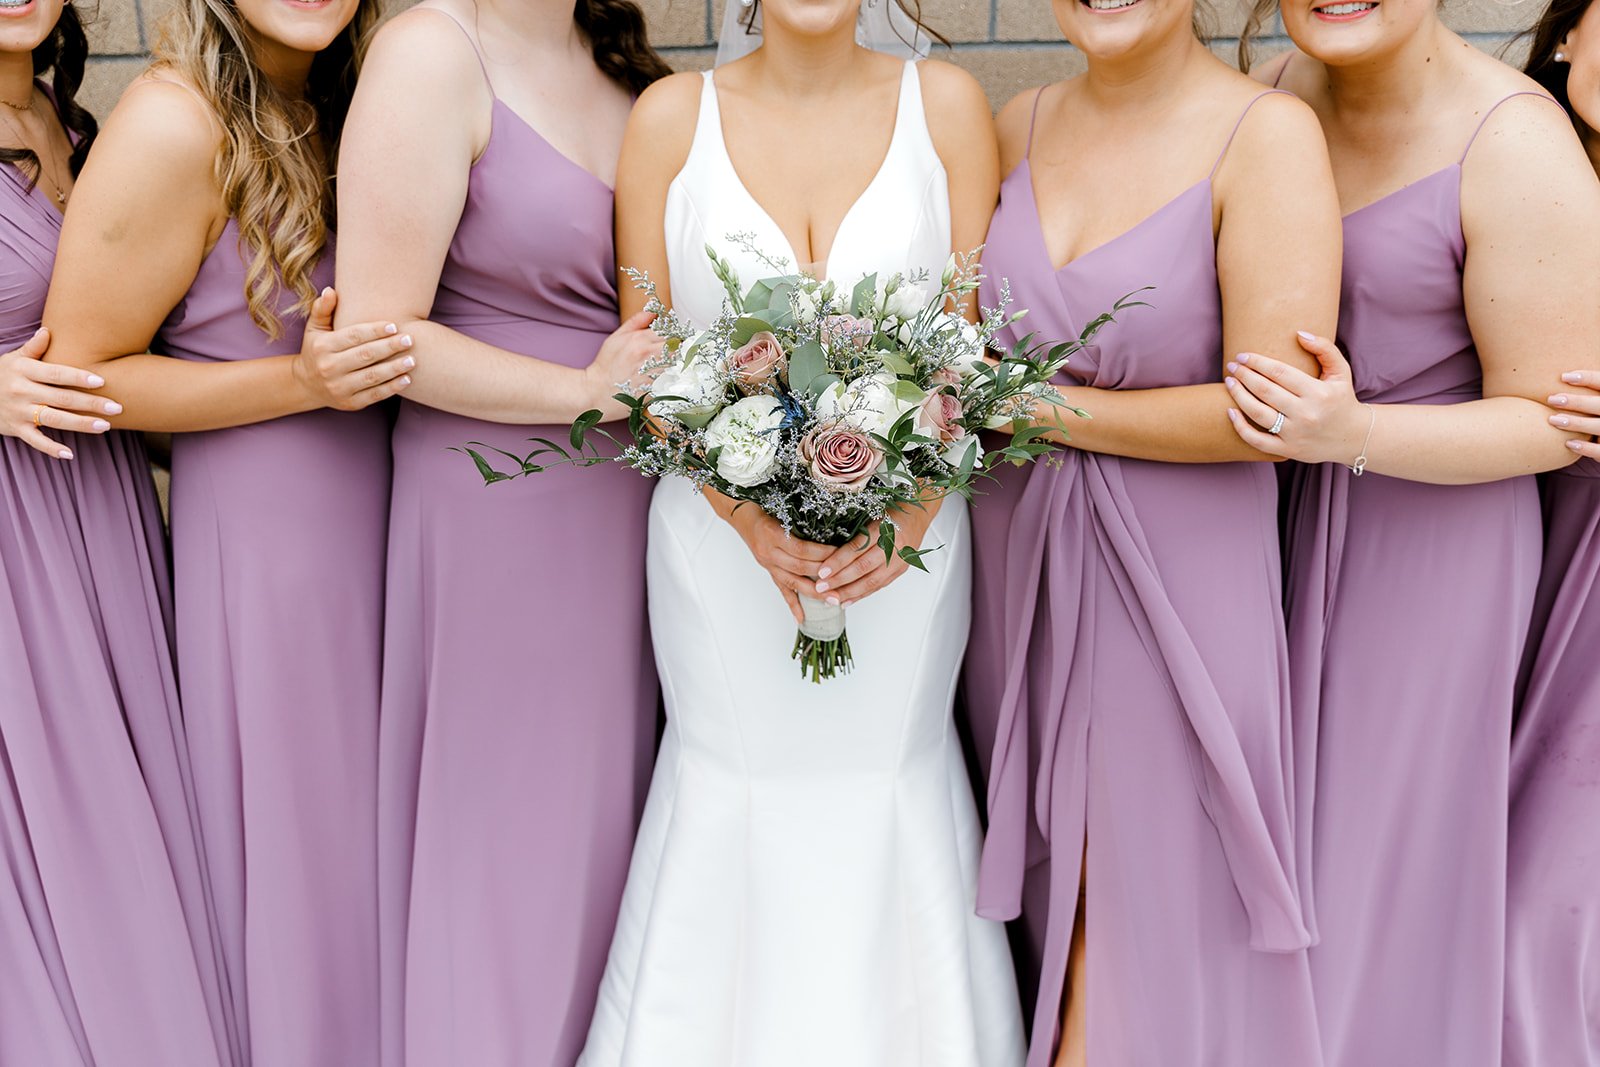 up close photo of brides maids with wedding bouquet